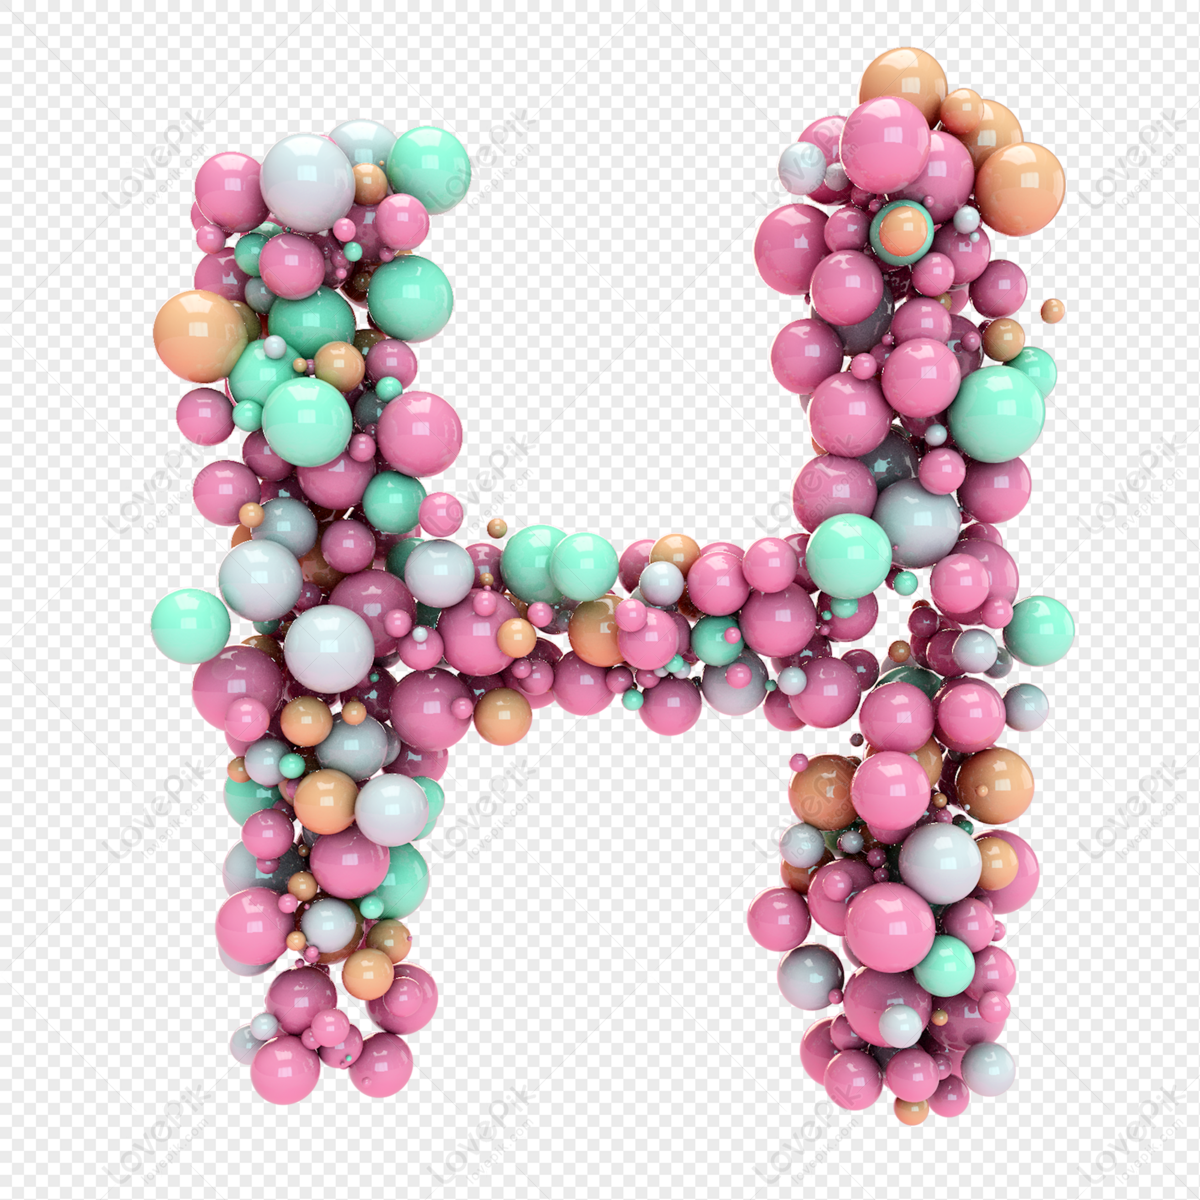 Coloured Balloons Form The Letter H PNG Image And Clipart Image ...